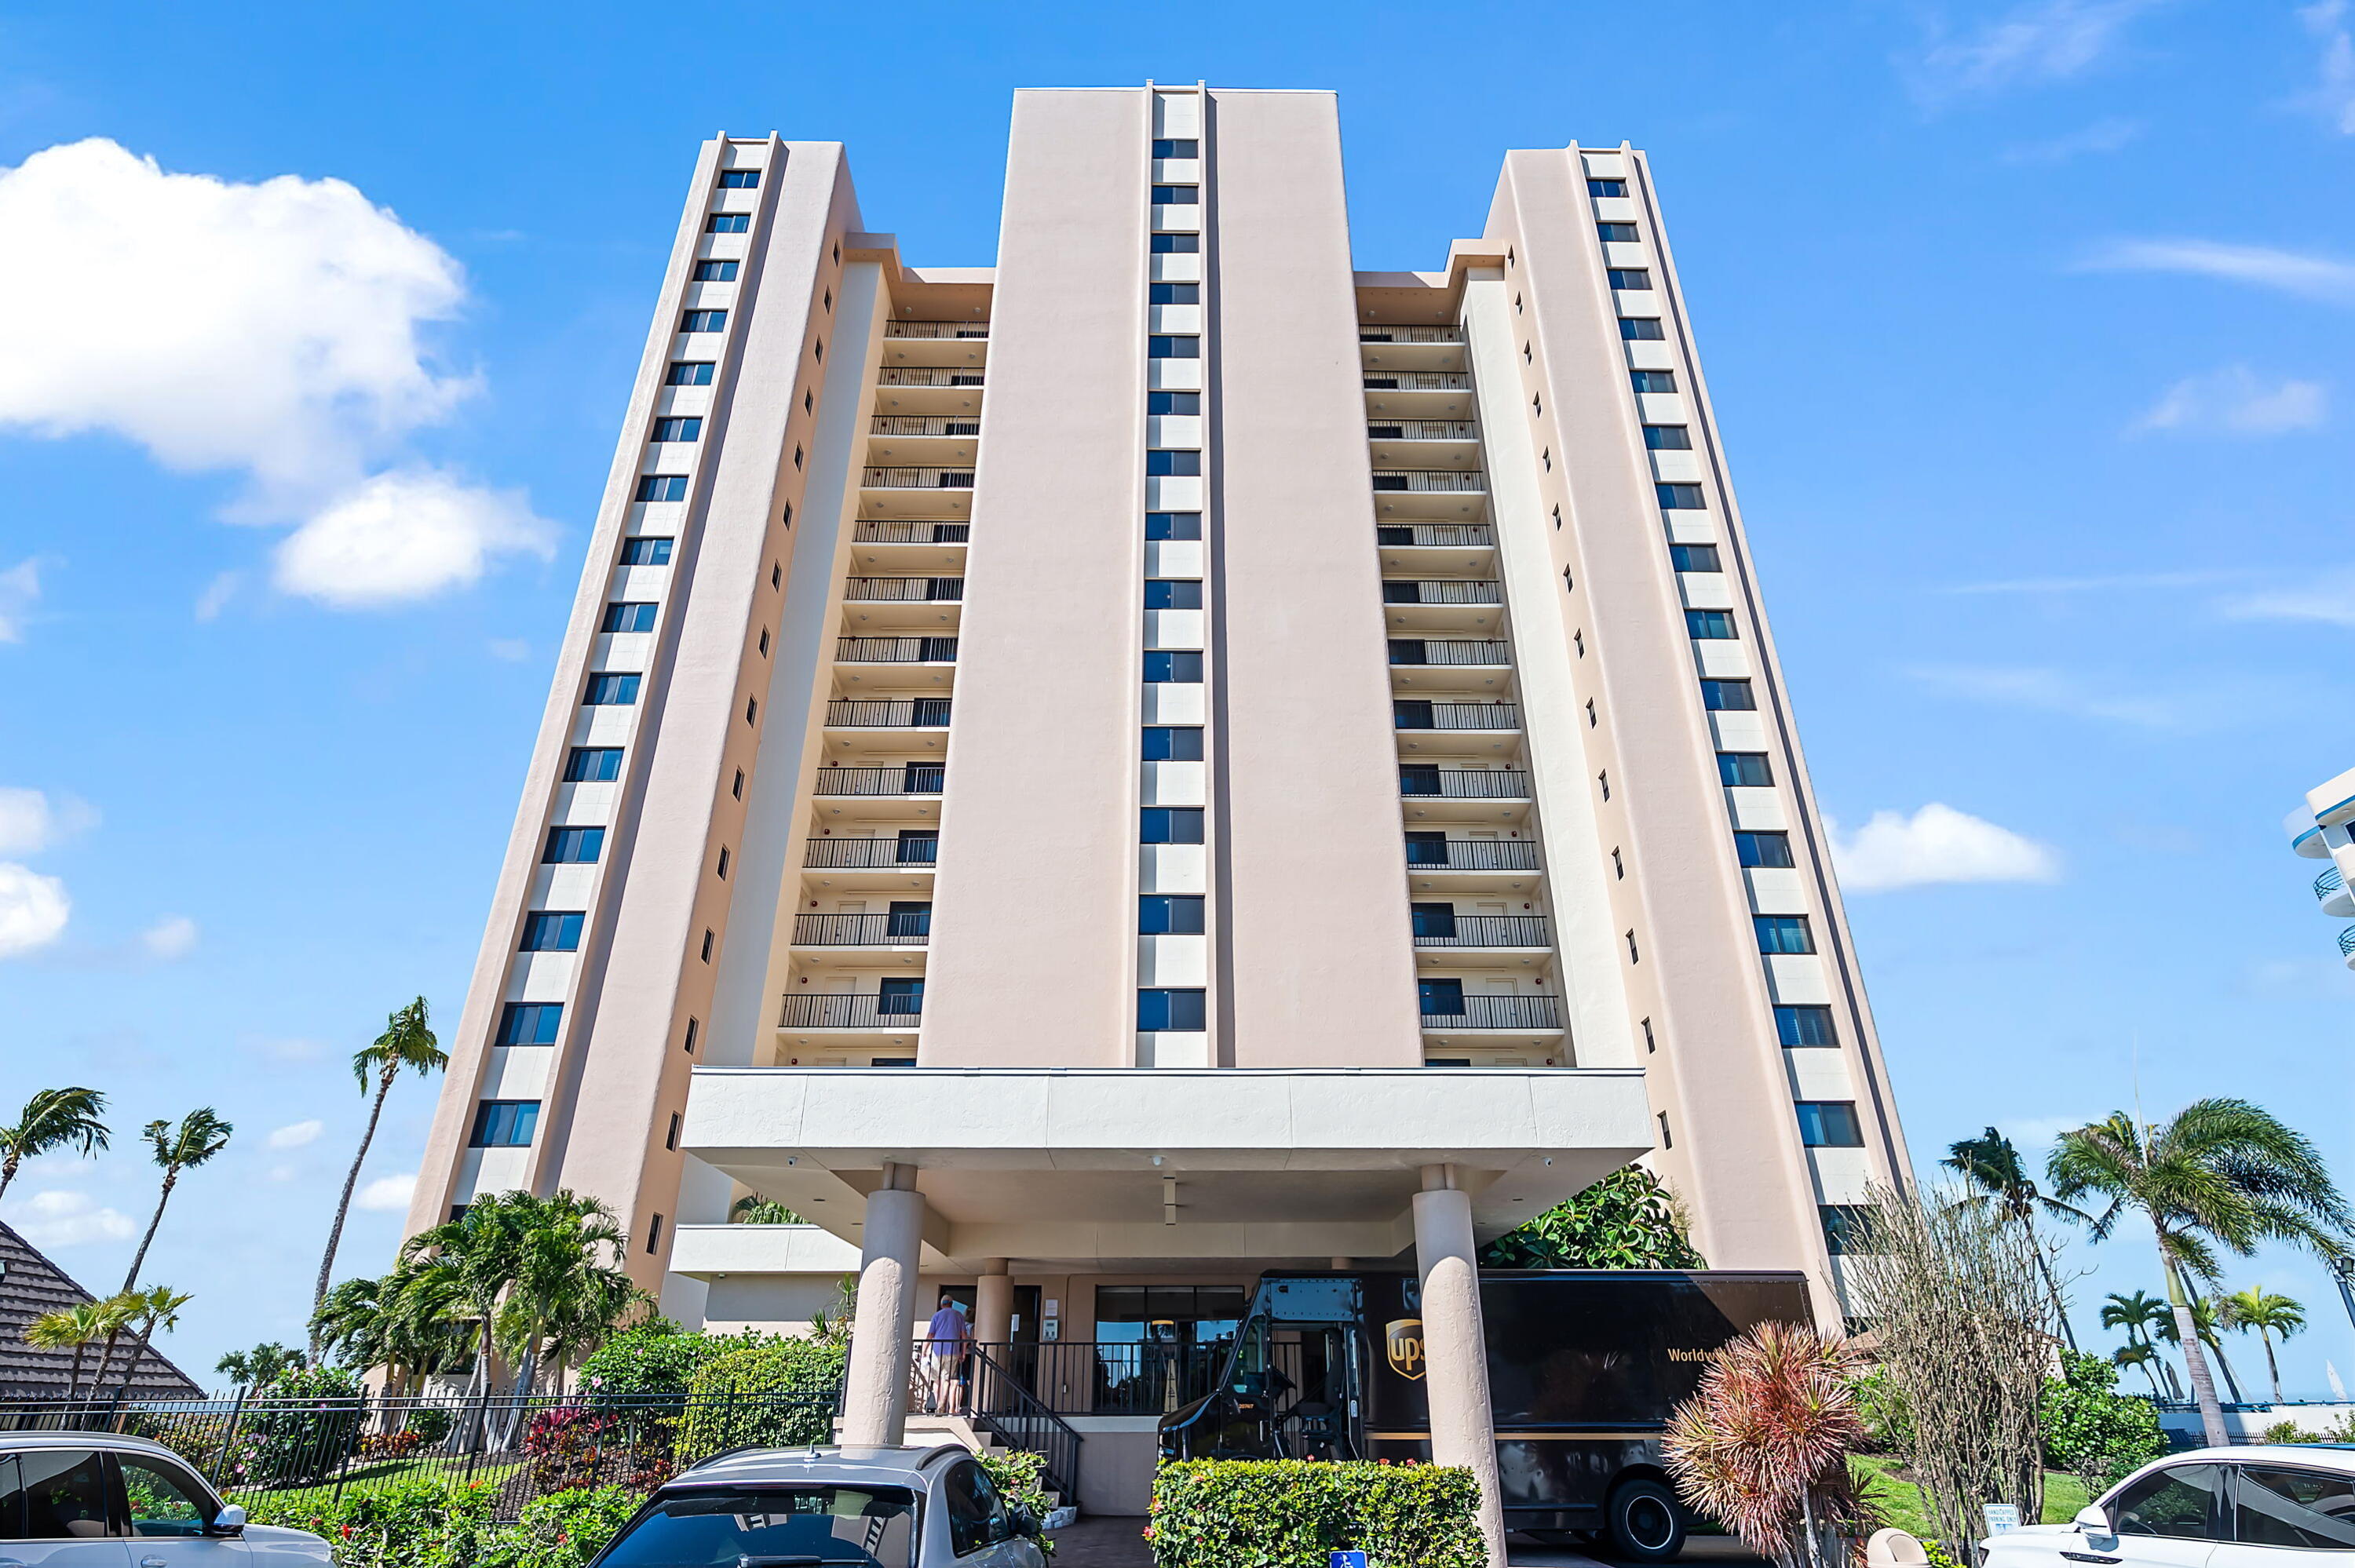 890 S Collier Boulevard Unit 103, Marco Island, Florida, 34145, United States, 2 Bedrooms Bedrooms, ,2 BathroomsBathrooms,Residential,For Sale,890 S Collier Boulevard Unit 103,1479272